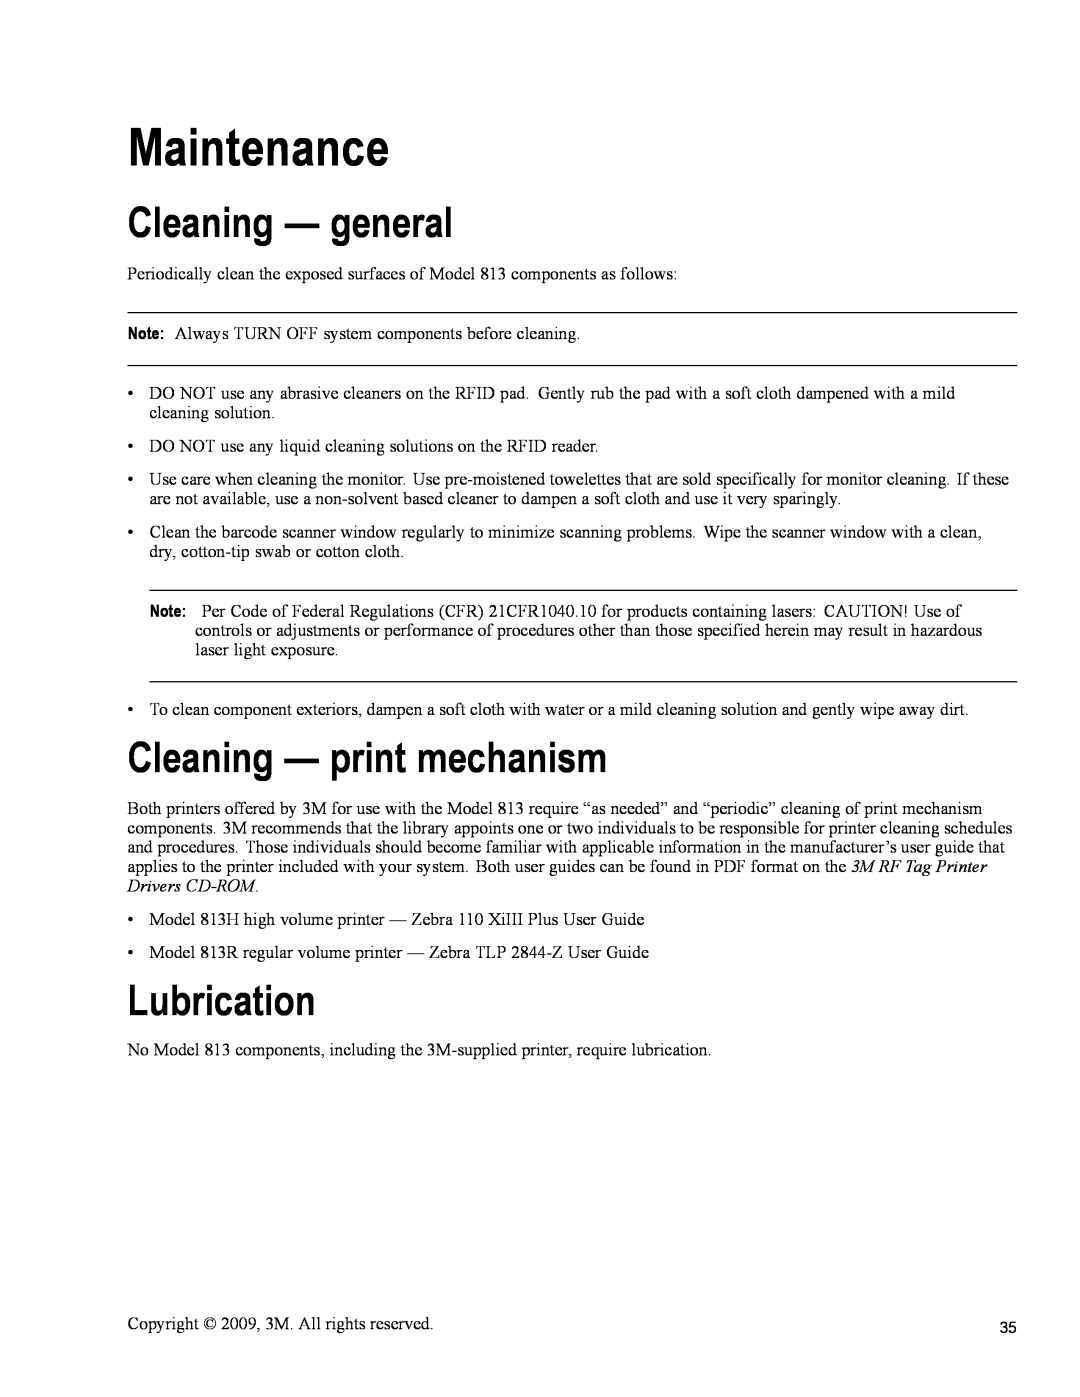 3M 813 owner manual Maintenance, Cleaning - general, Cleaning - print mechanism, Lubrication 